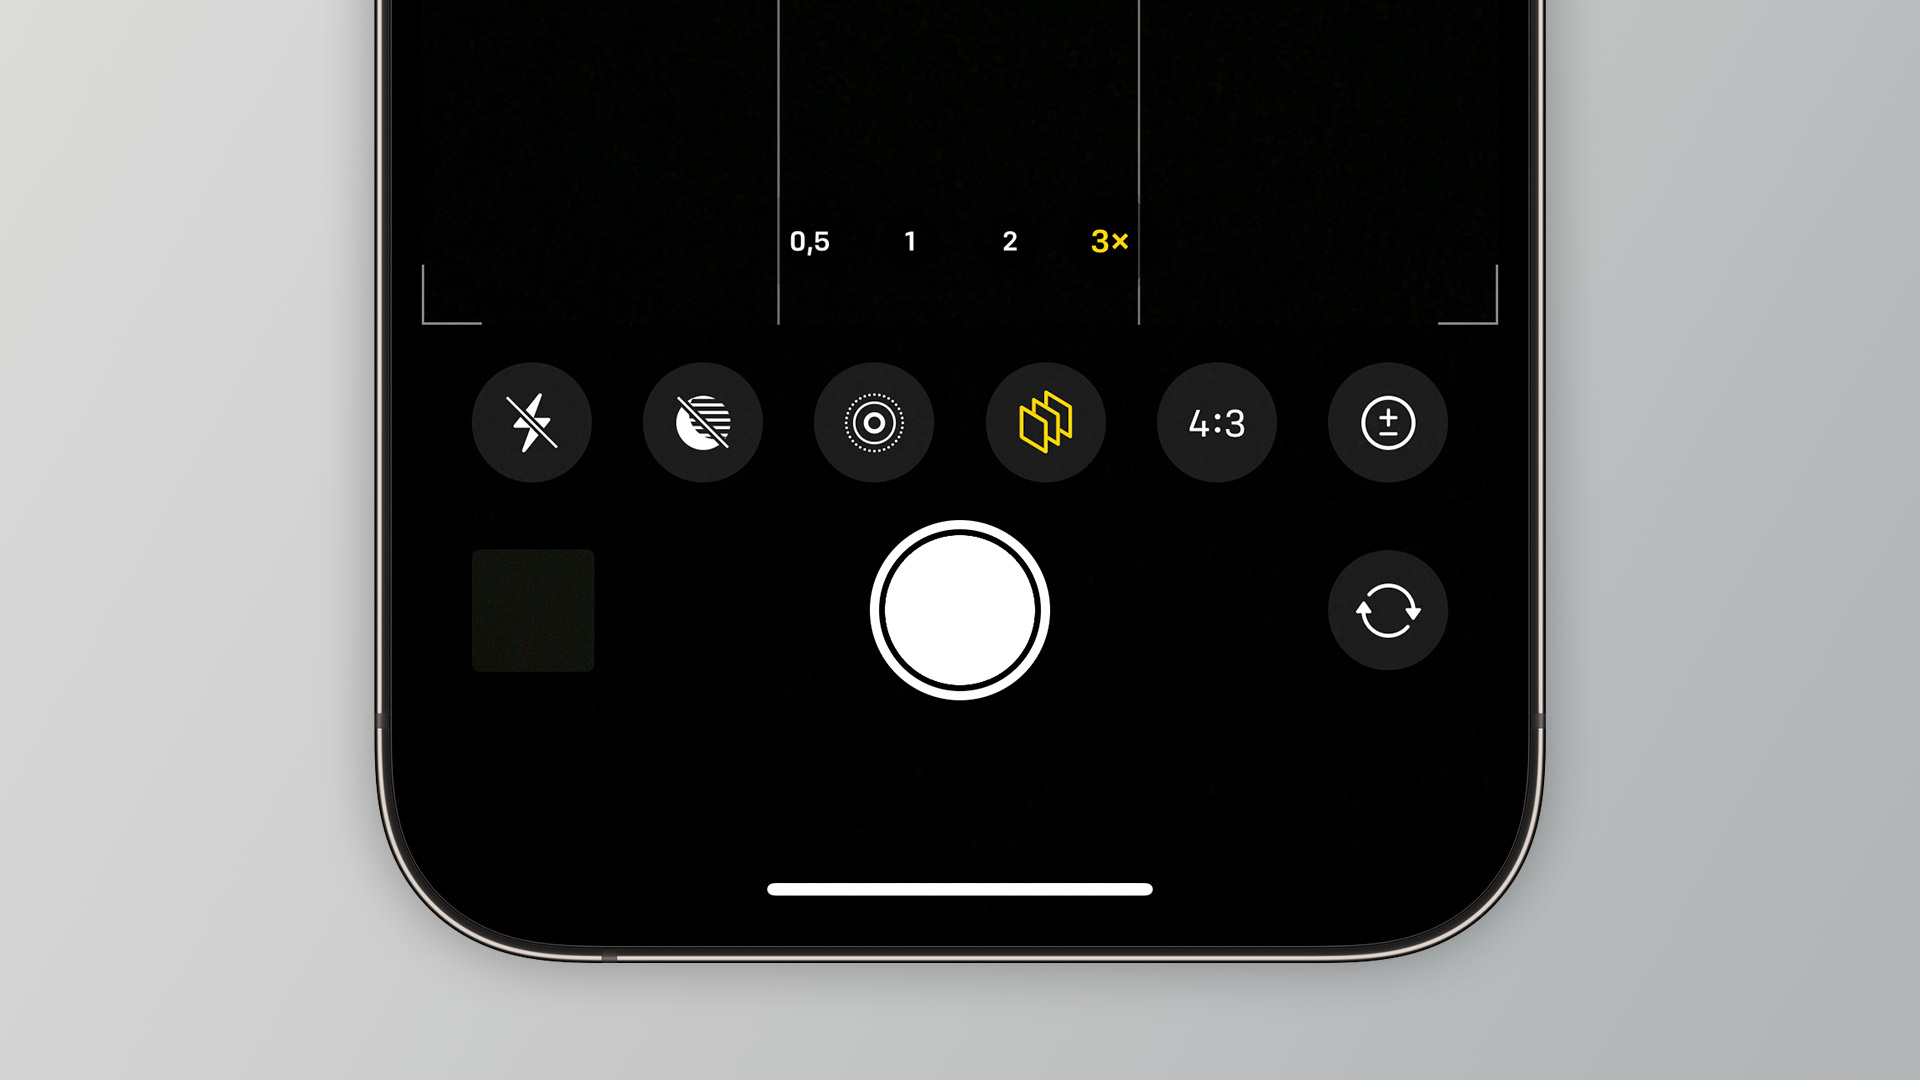 These camera settings can help you take better photos and videos with your iPhone